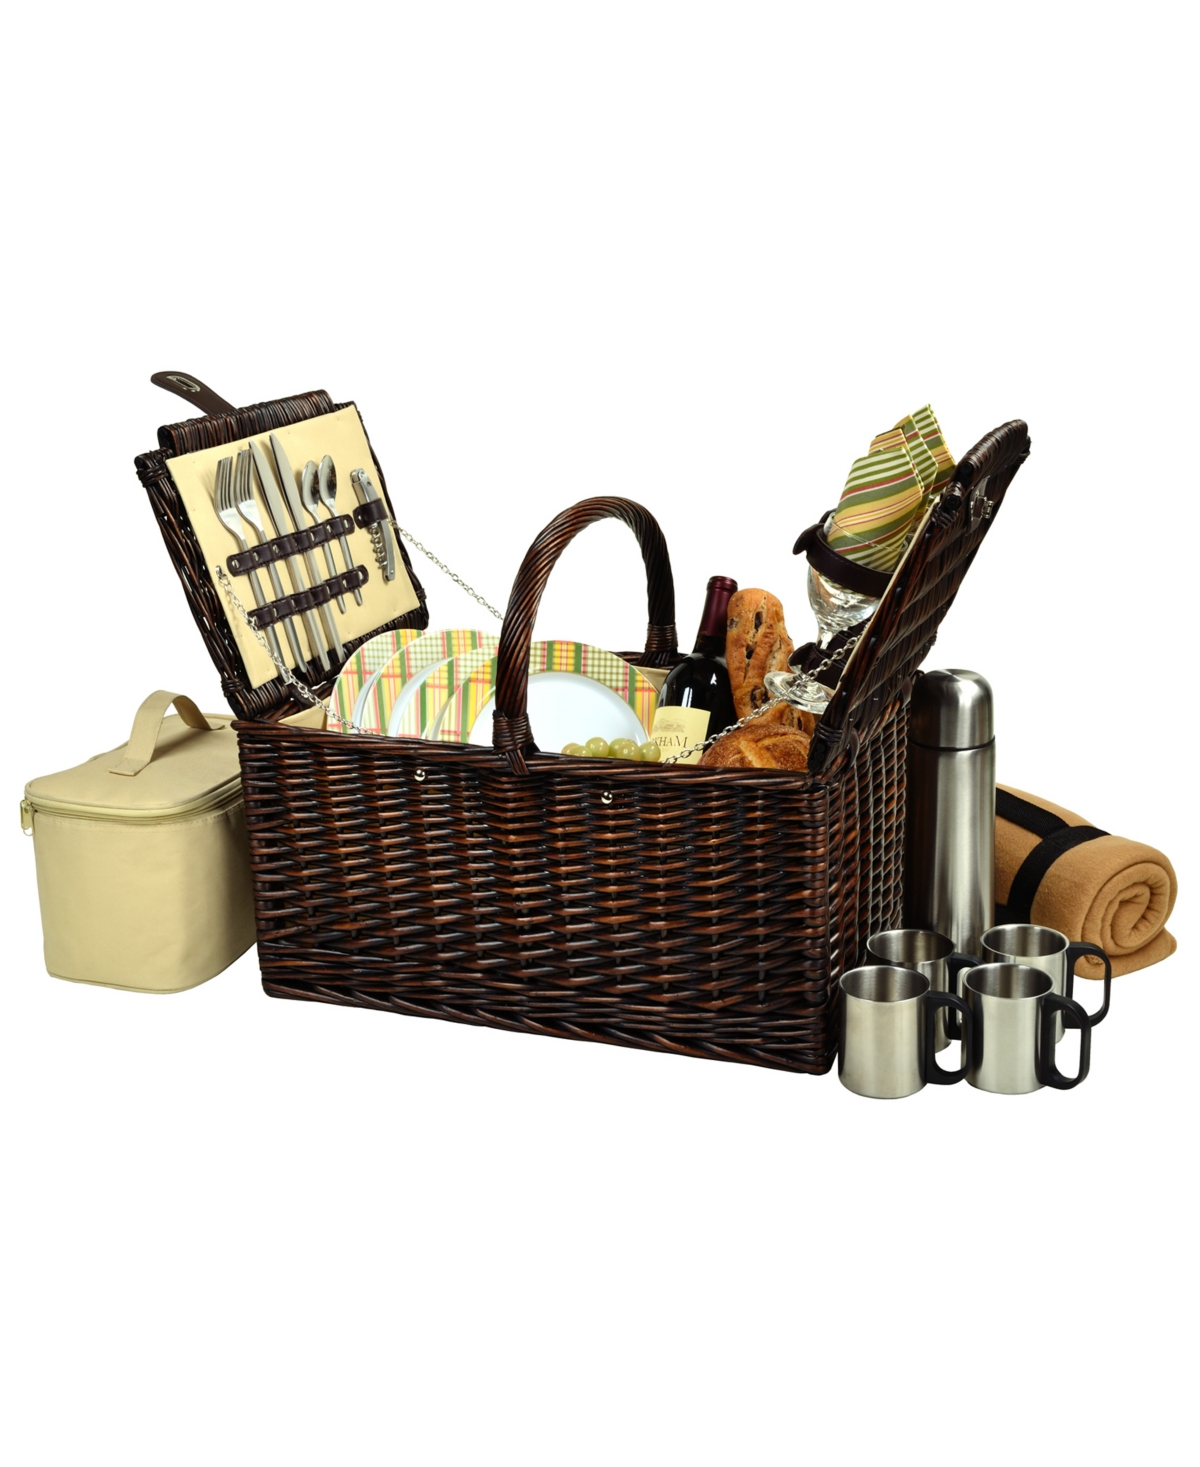 Buckingham Willow Picnic, Coffee Basket for 4 with Blanket - Orange